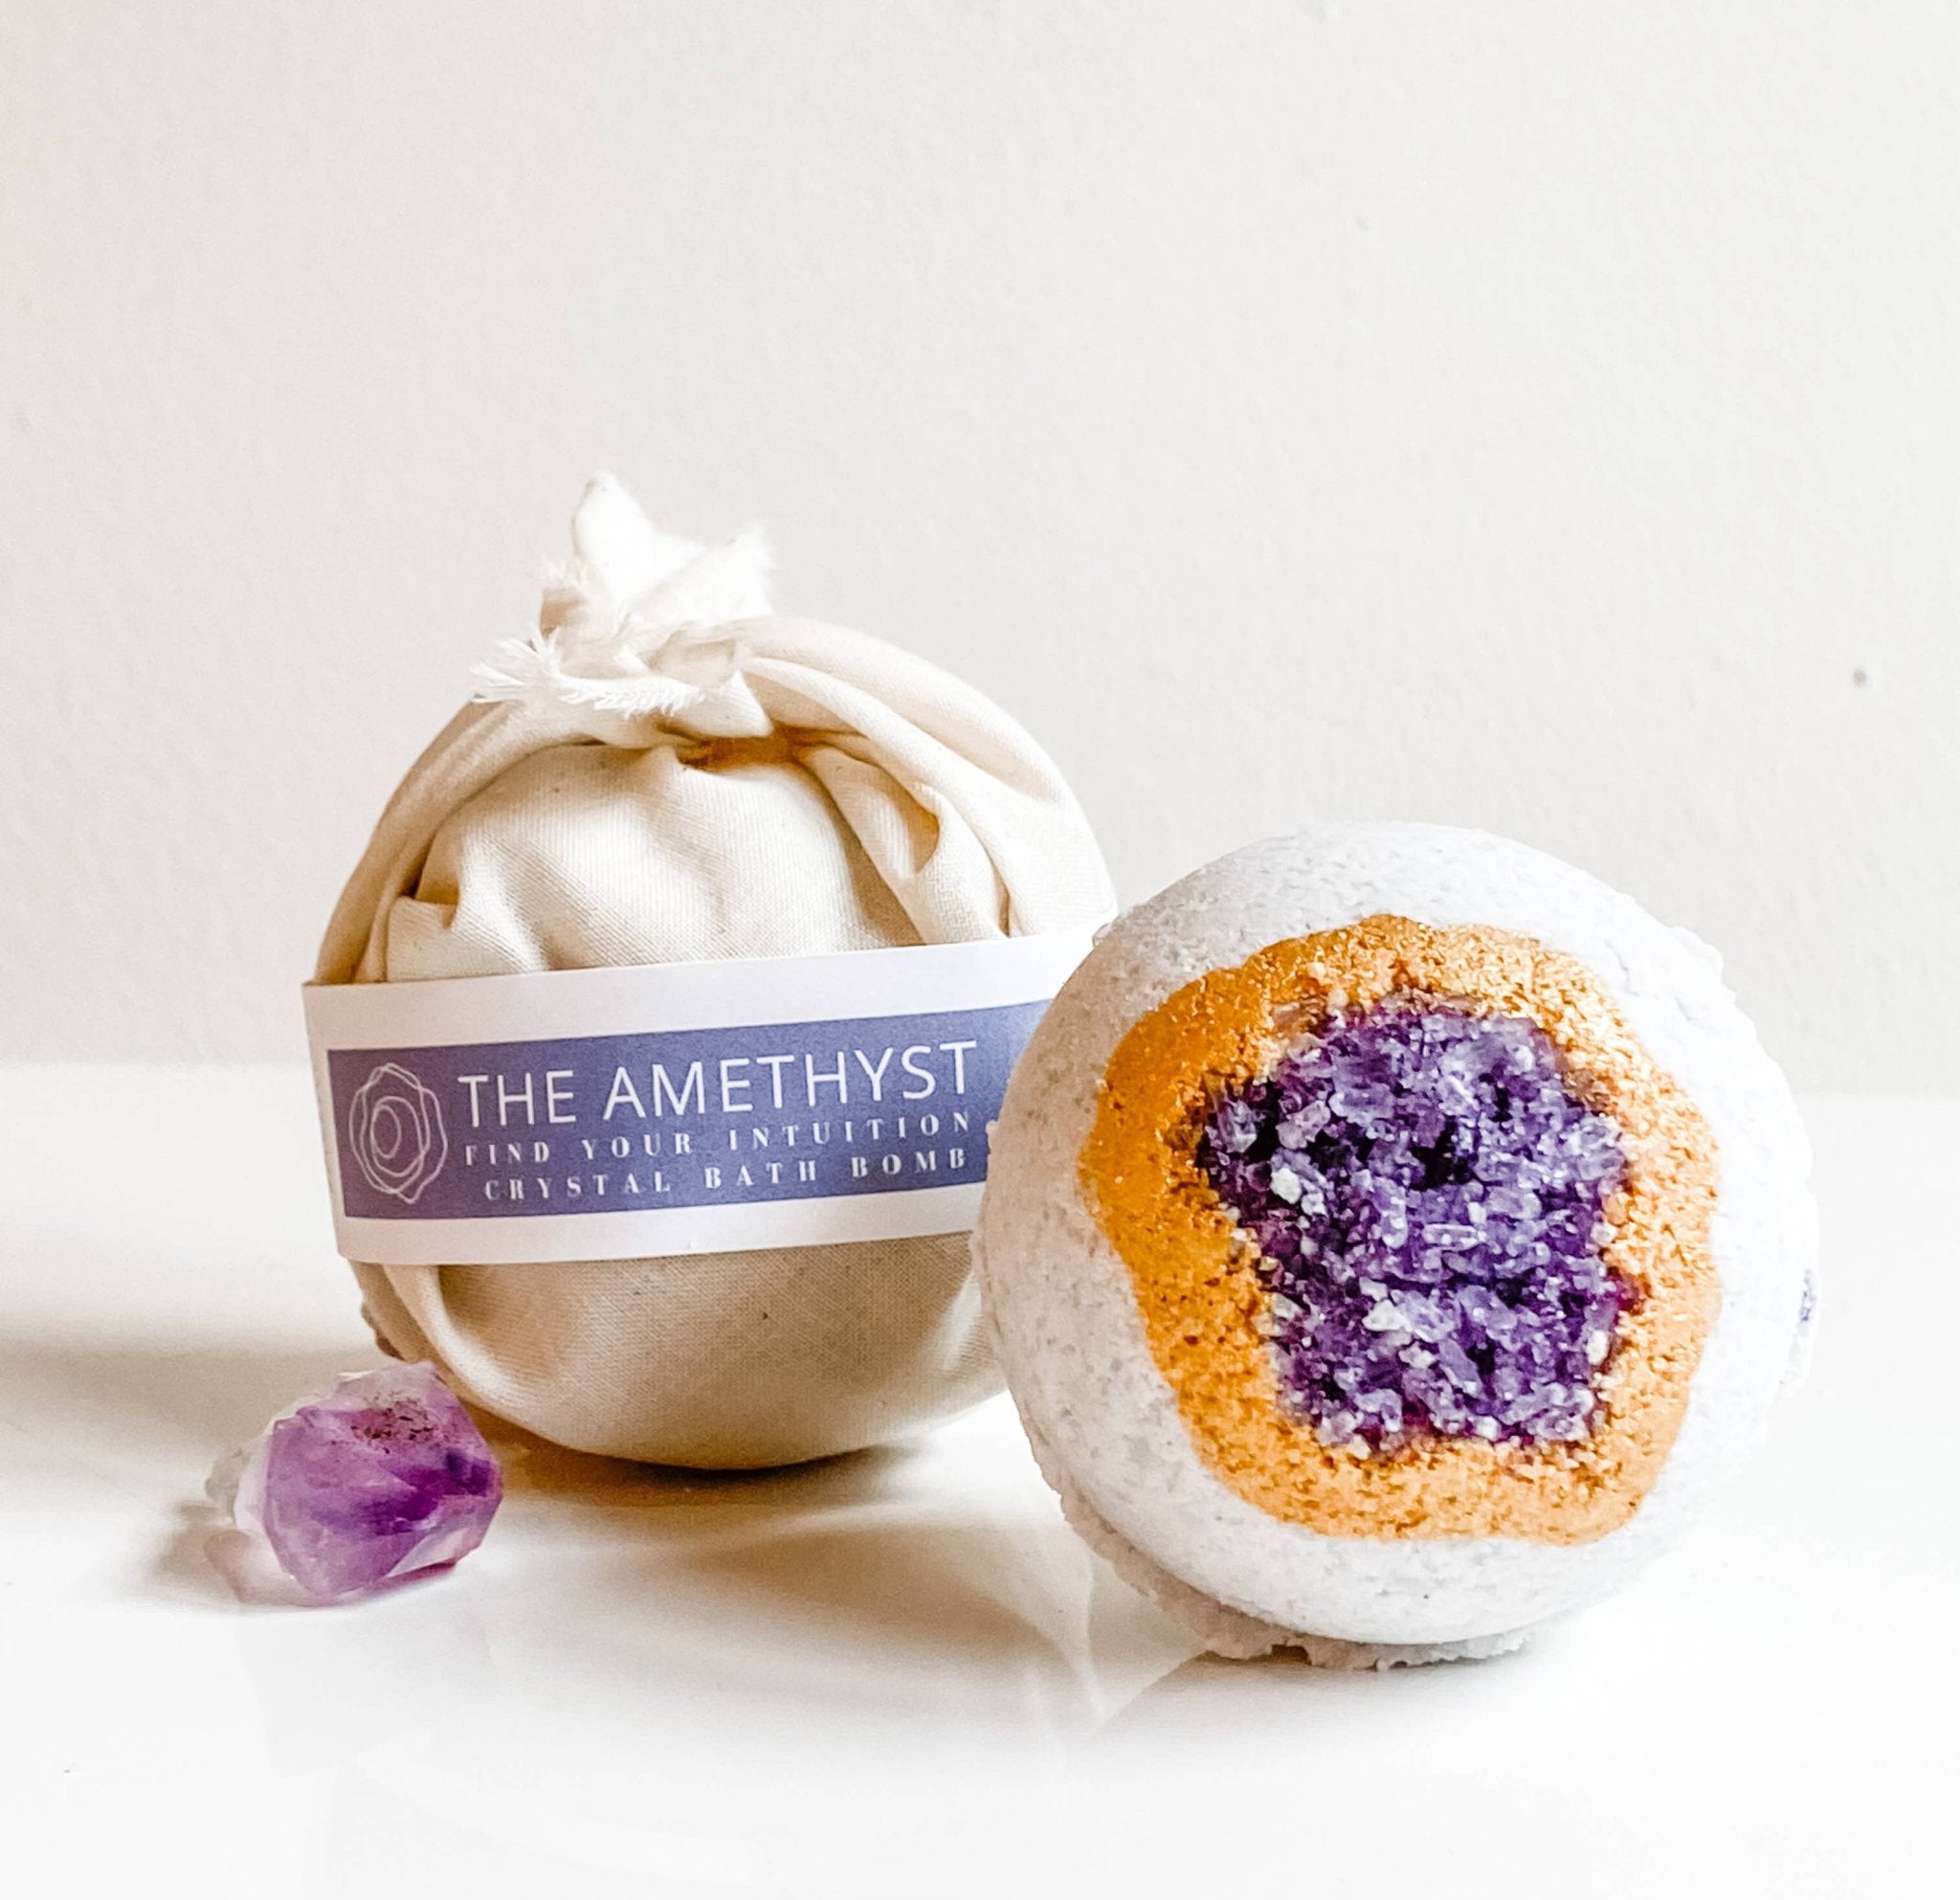 Find Your Intuition | Amethyst | Crystal Bath Bomb - Spiral Circle